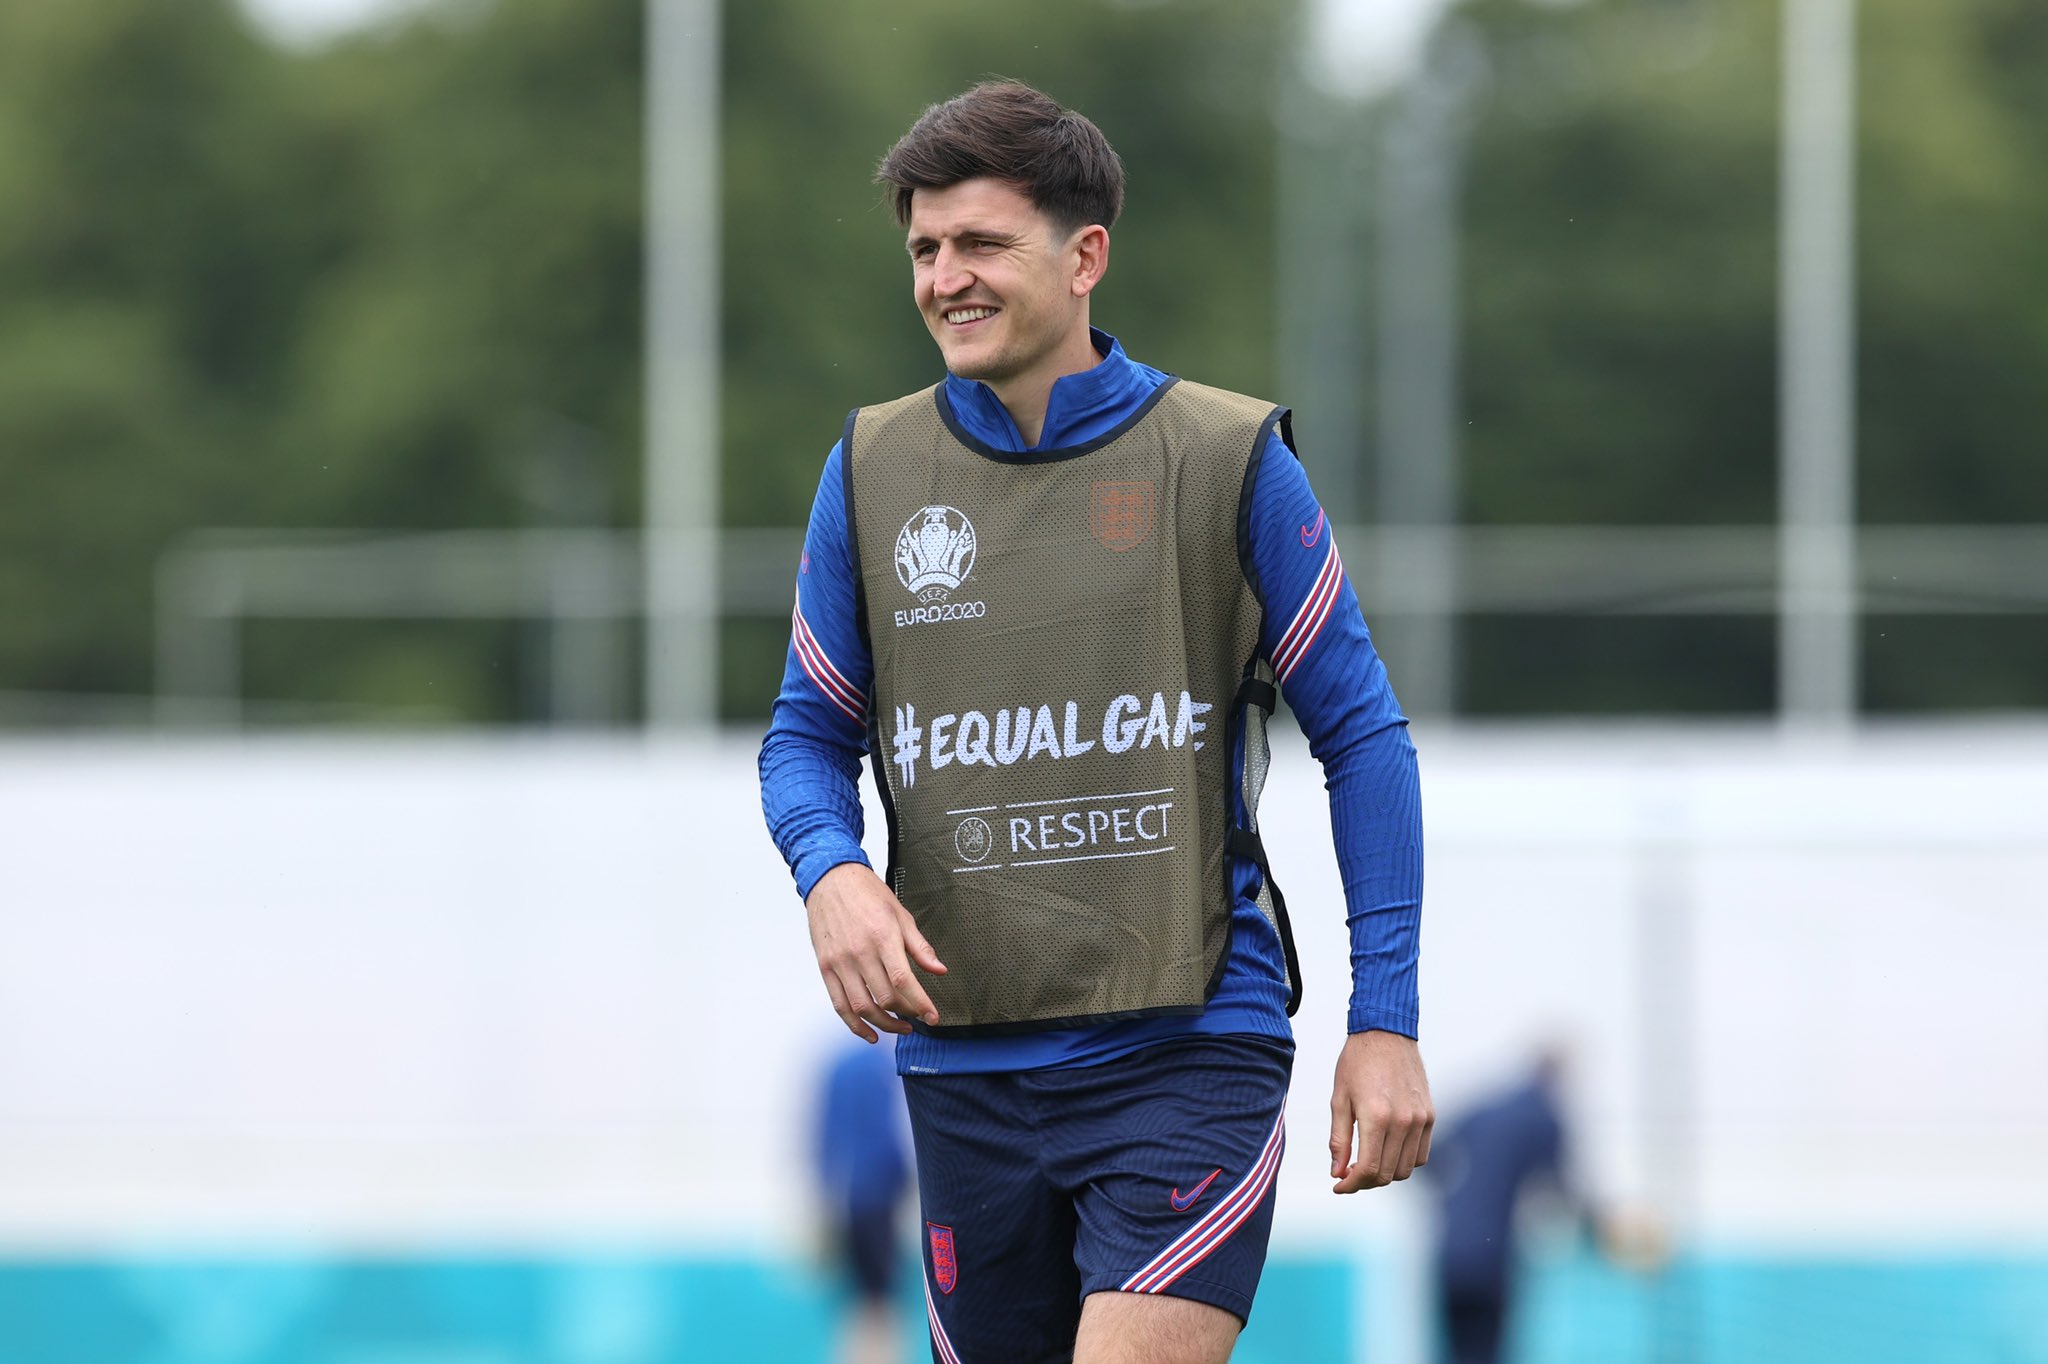 Fans have been amazing and won't let minority affect relationship, claims Harry Maguire